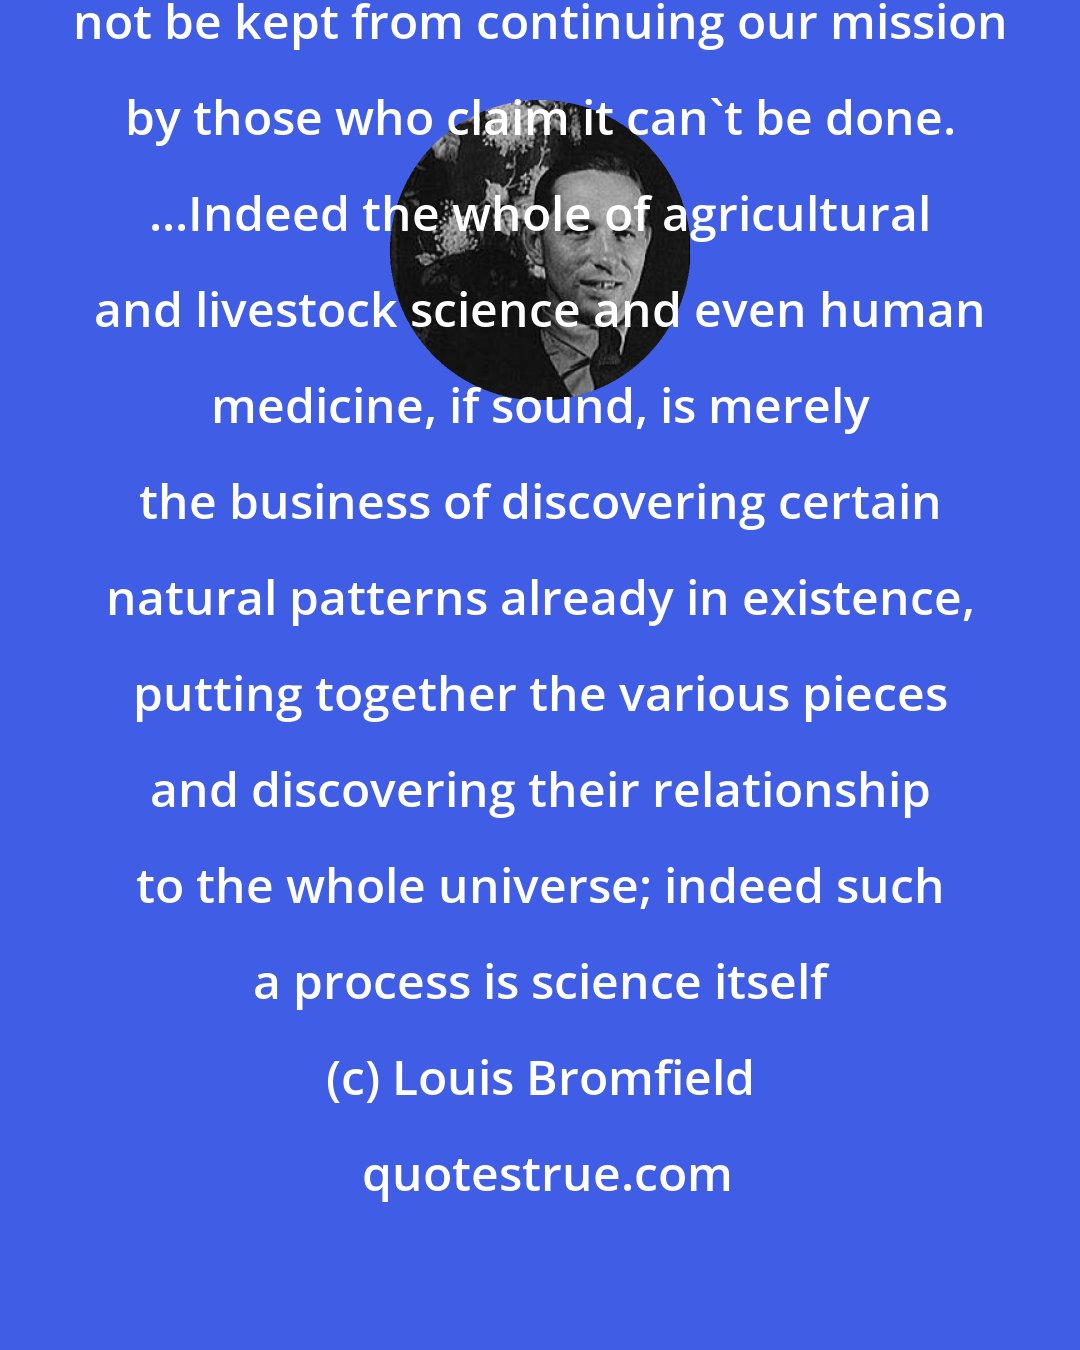 Louis Bromfield: Whether we fail or not, we shall not be kept from continuing our mission by those who claim it can't be done. ...Indeed the whole of agricultural and livestock science and even human medicine, if sound, is merely the business of discovering certain natural patterns already in existence, putting together the various pieces and discovering their relationship to the whole universe; indeed such a process is science itself